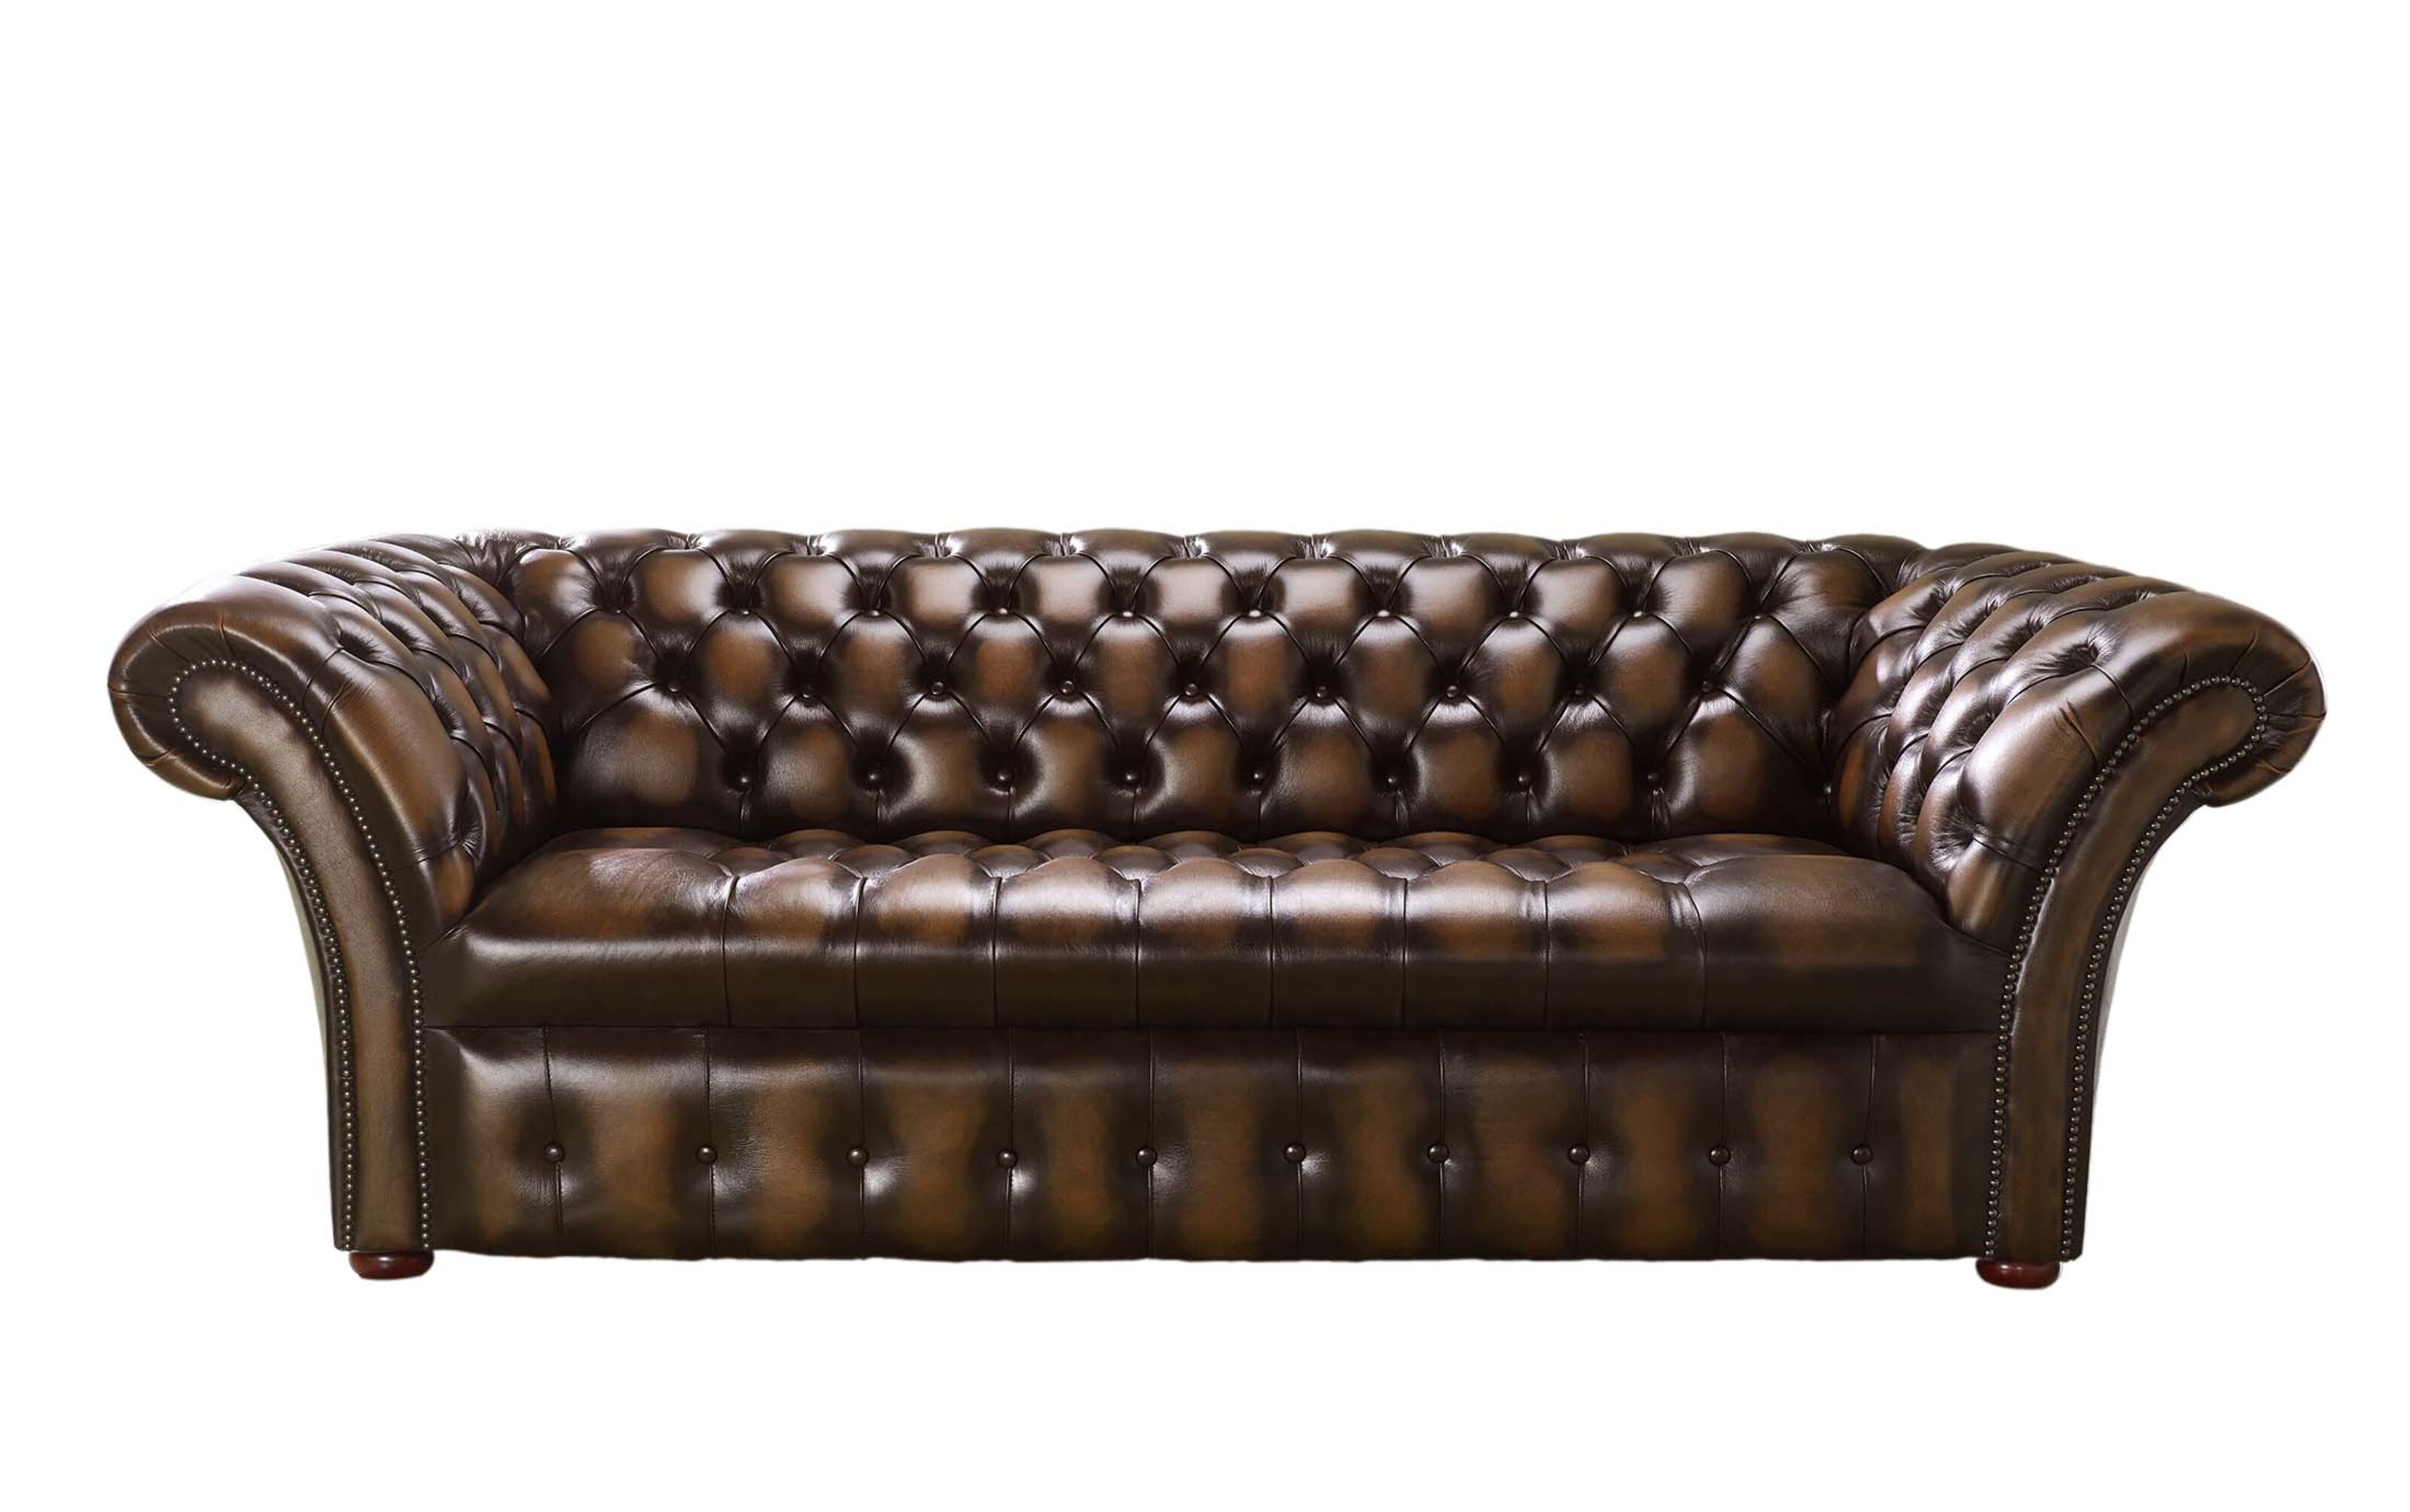 Elevate Your Home with a Chesterfield Sofa Bed: Luxury, Comfort, and Elegance Combined  %Post Title